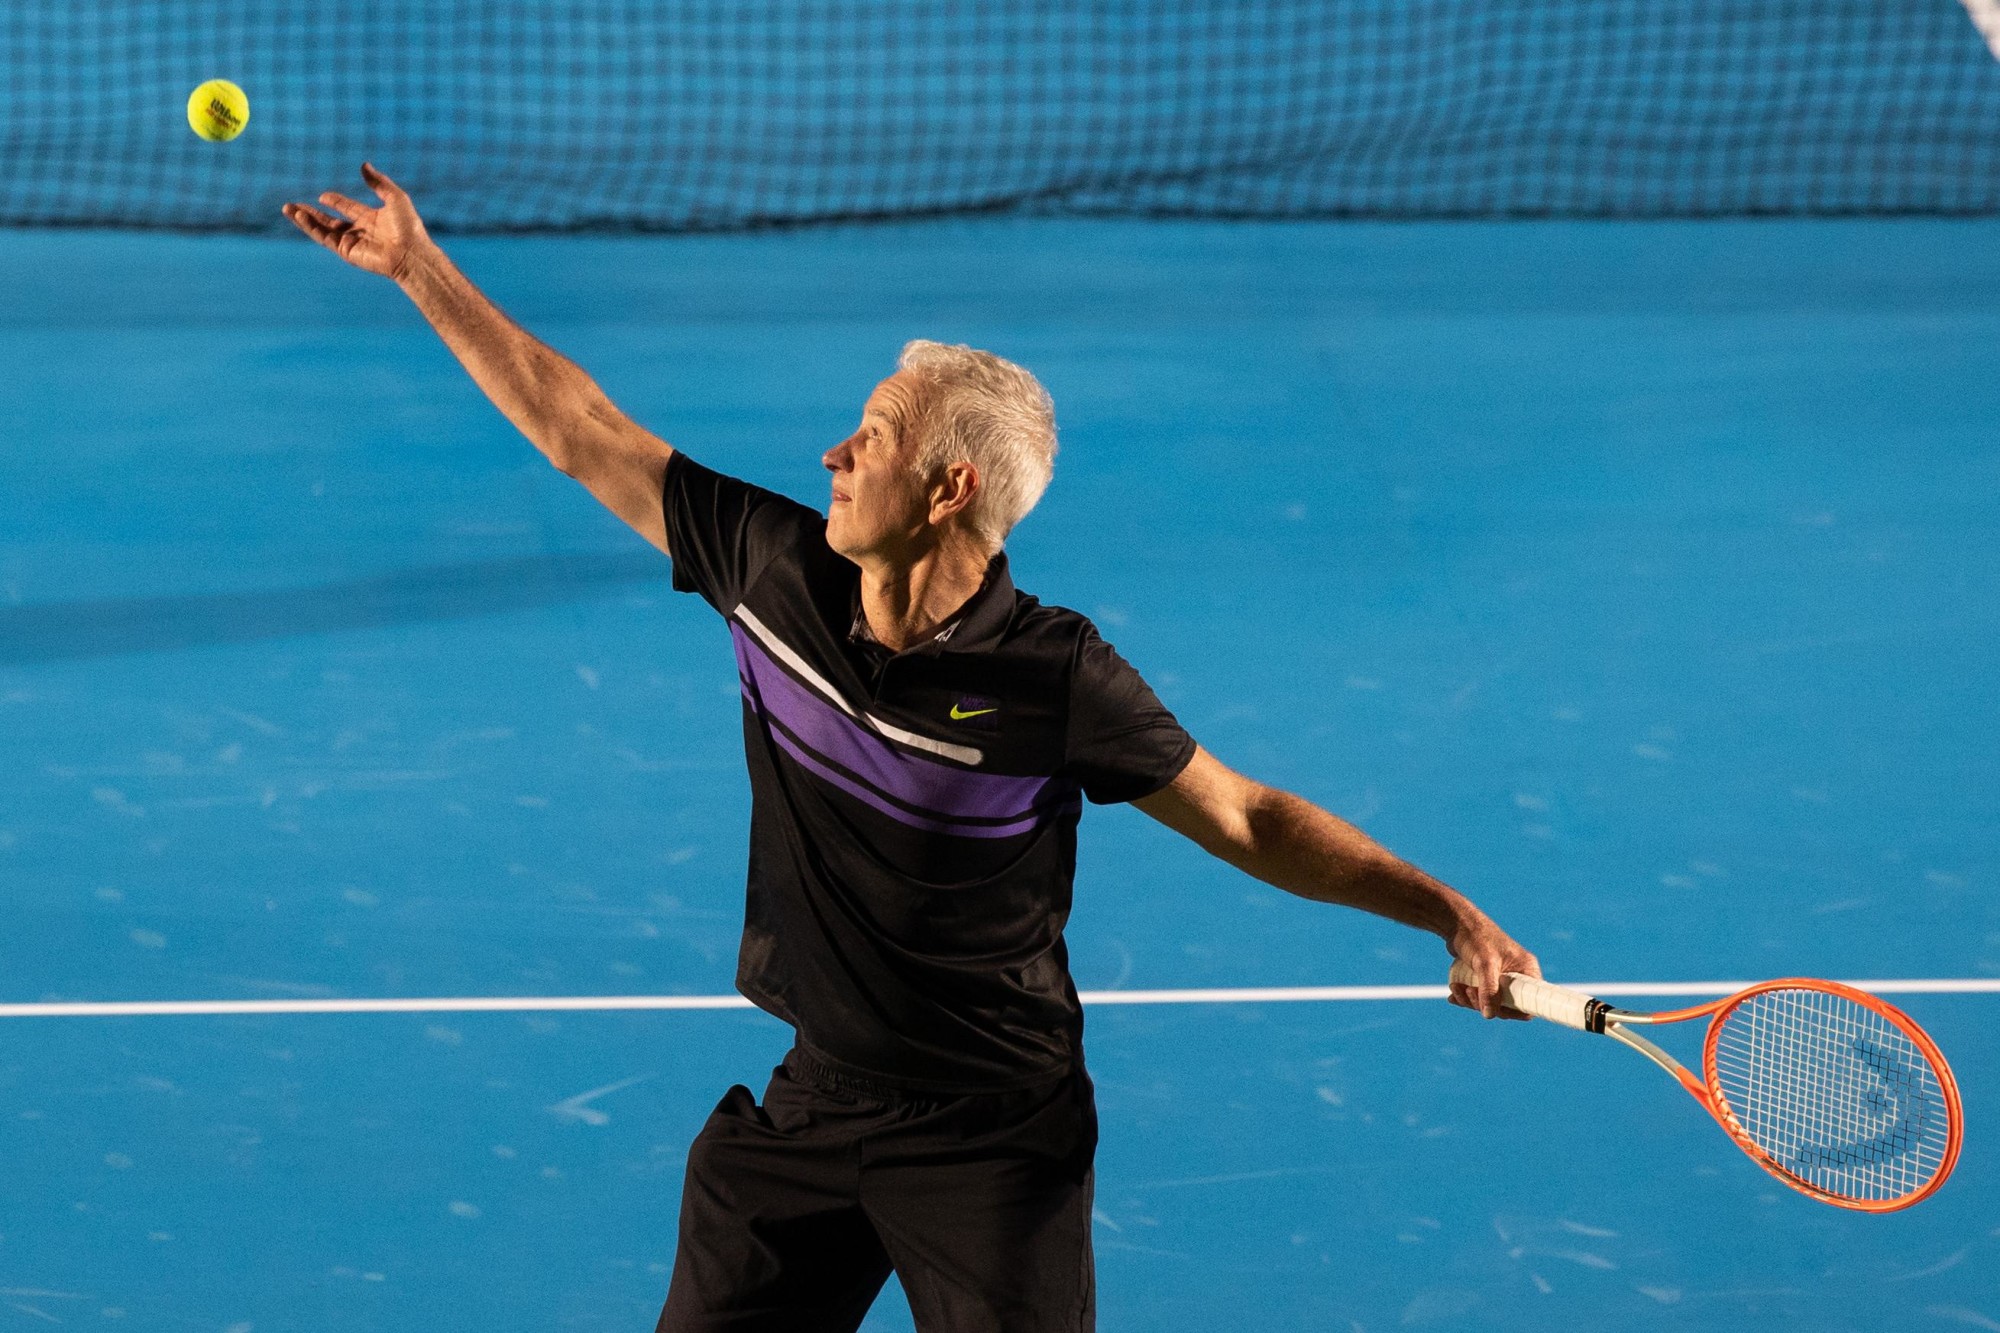 Tennis legend John McEnroe during the Men’s Doubles Exhibition Game against Mark Philippoussis and Greg Rusedski for Expo 2020 Dubai Tennis Week at the Expo Sports Arena m52466